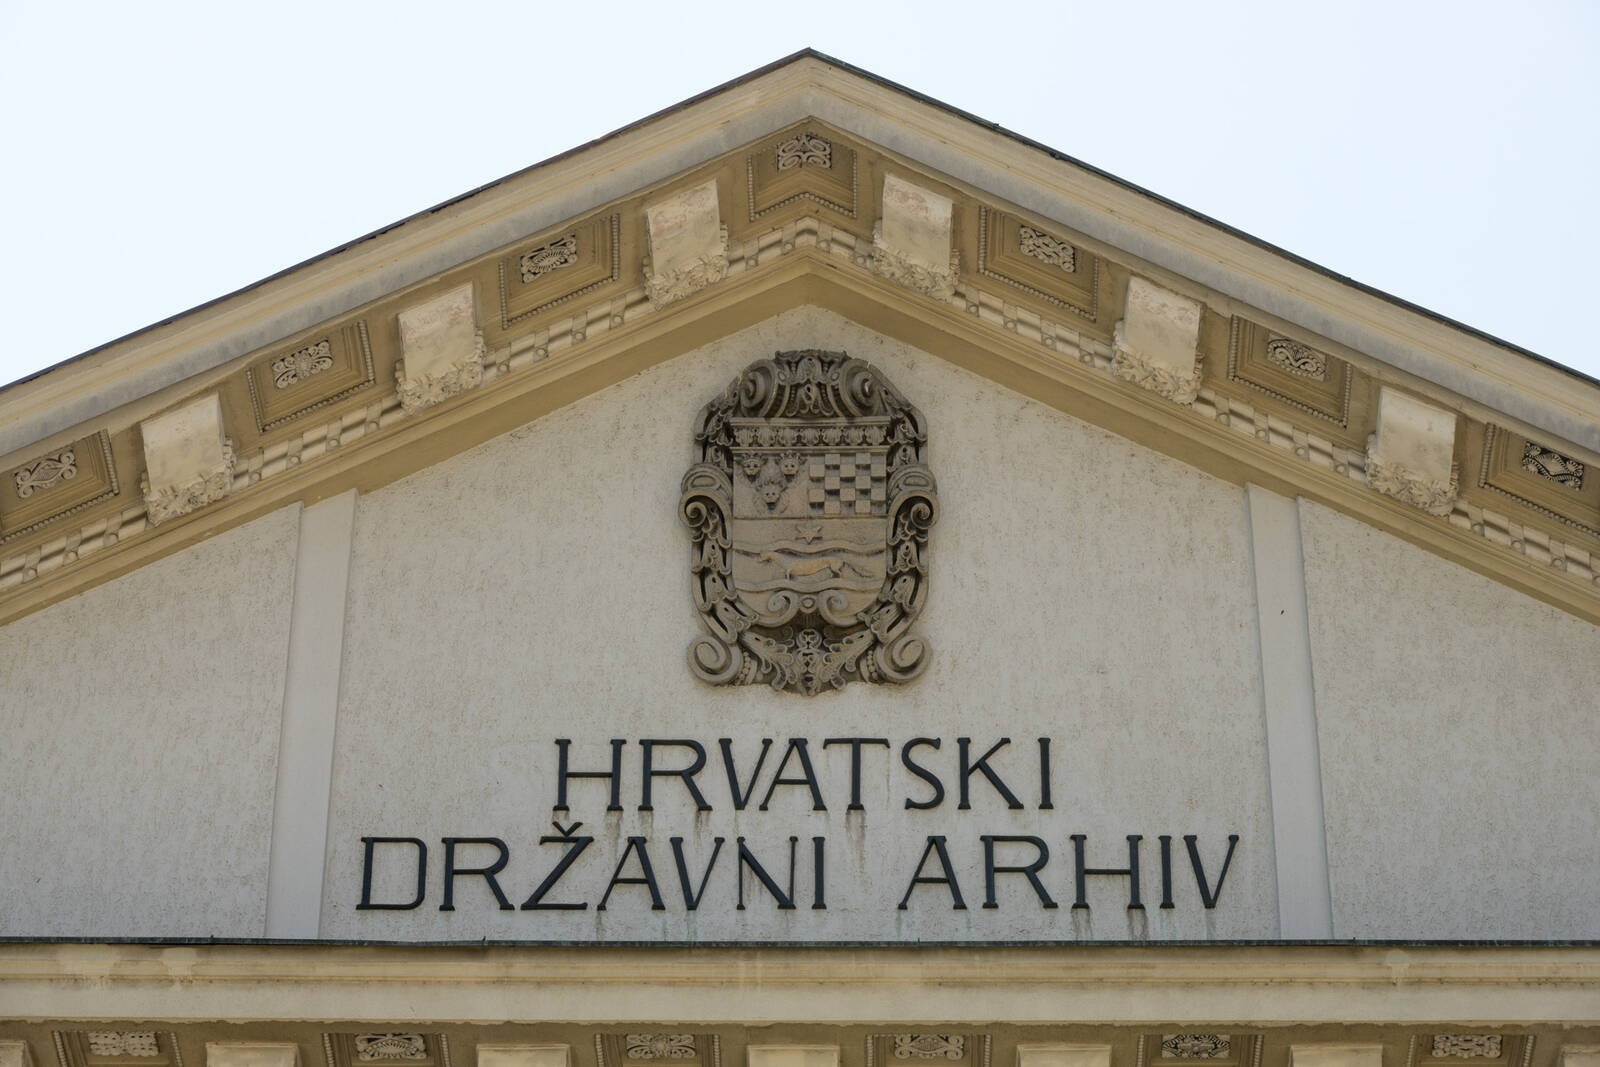 Image of Croatian State Archives by Luka Esenko